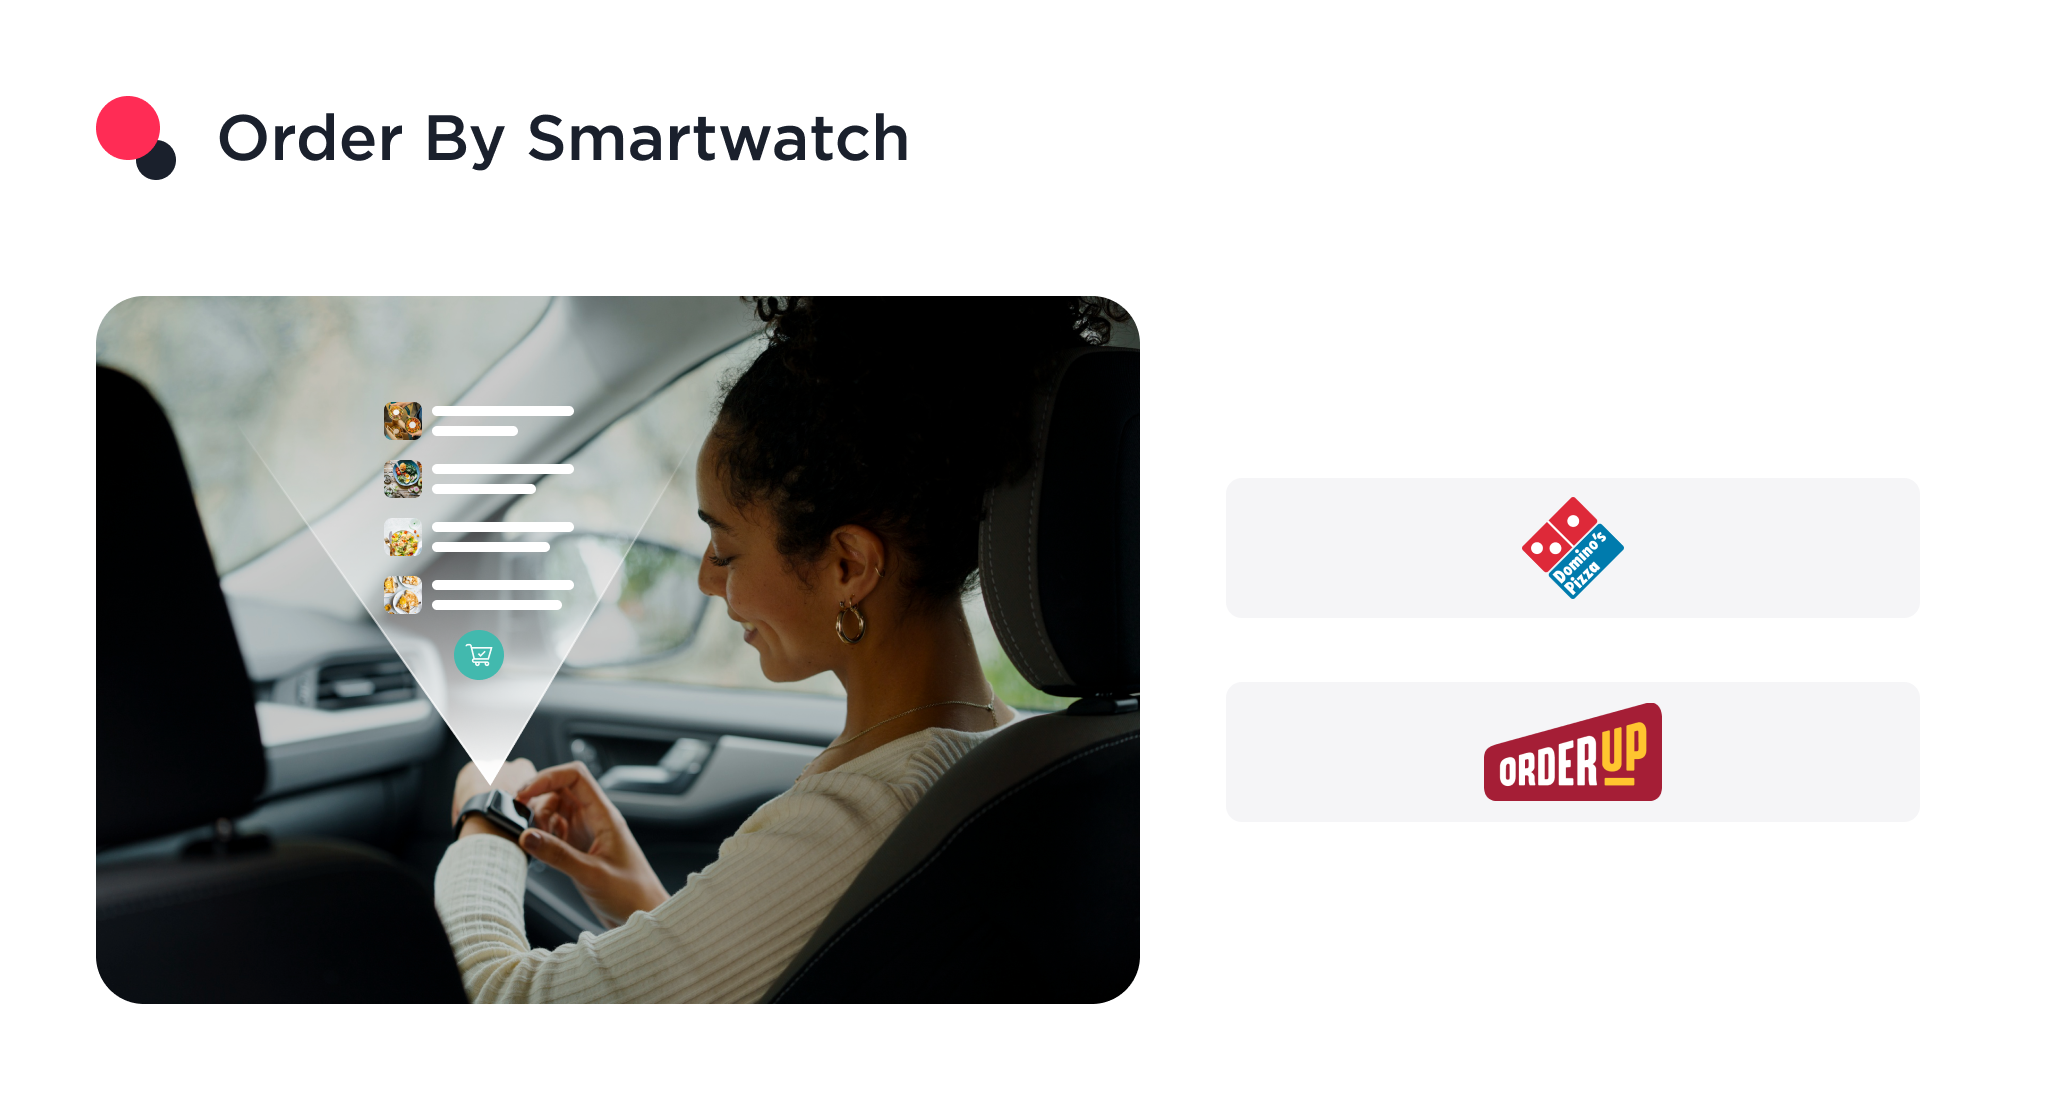 the image shows the virtual ordering by smartwatch